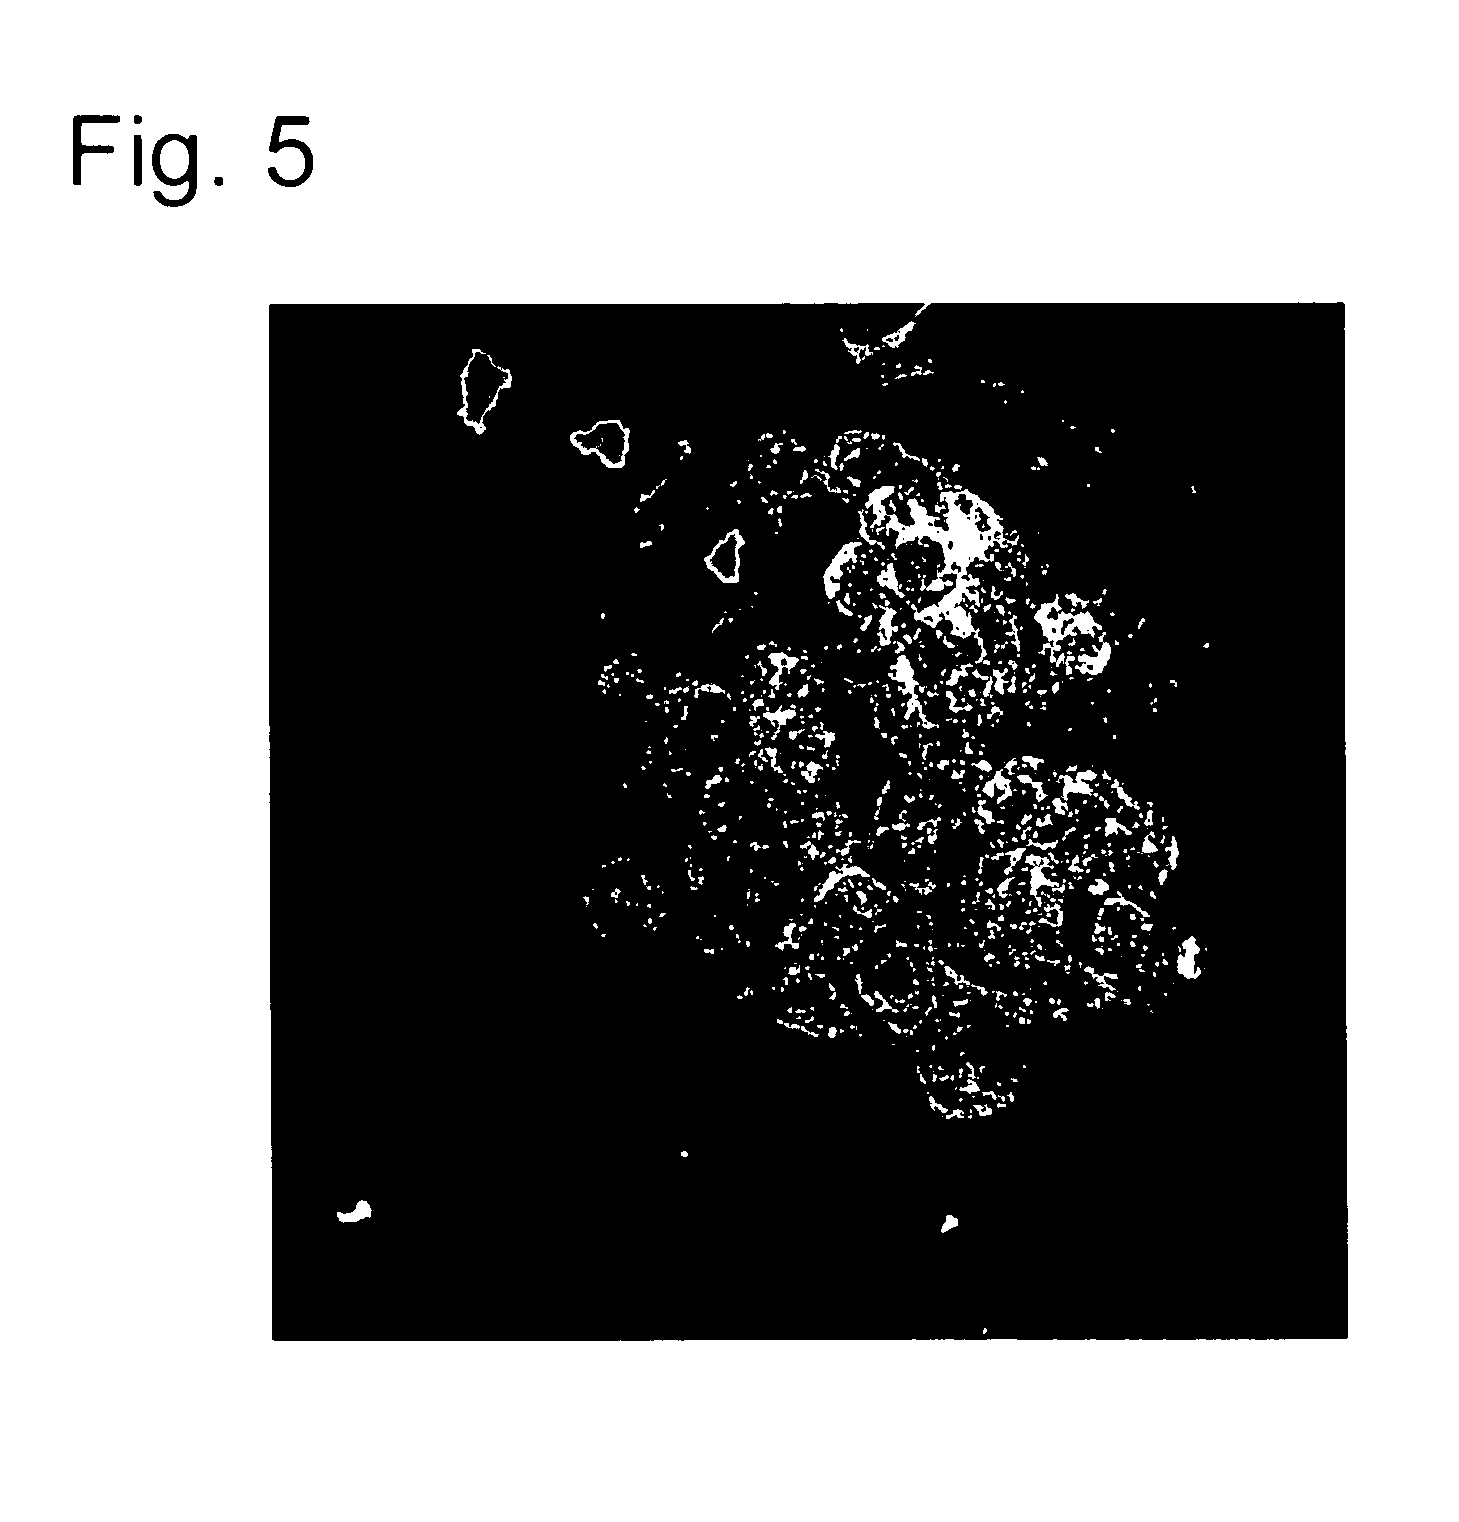 Cultured cell construct containing spheroids of cultured animal cells and utilization thereof